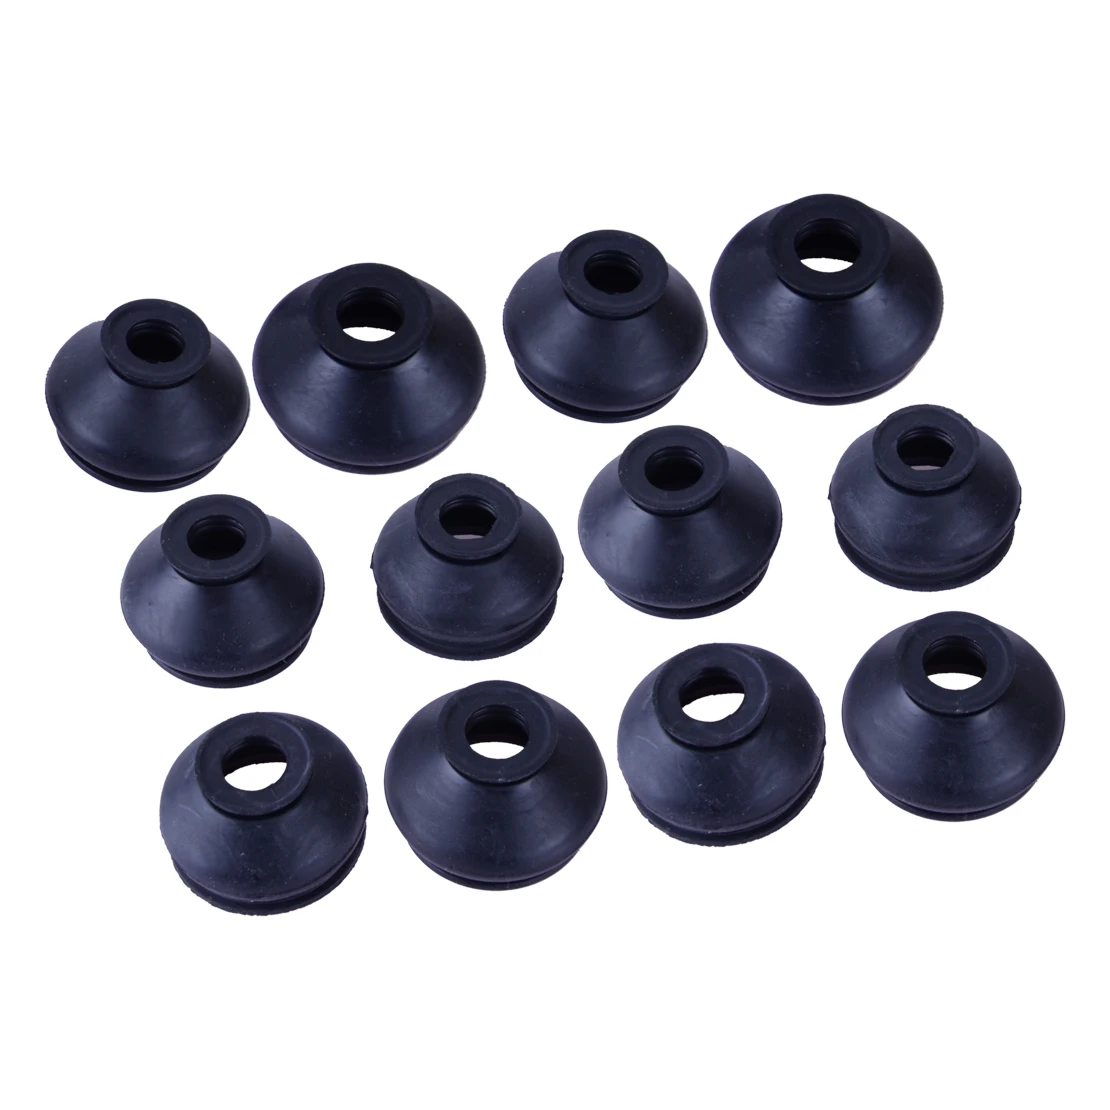 

Black Rubber 12pcs/set Tie Rod End Ball Joint Dust Boots Cover Gaiters Universal